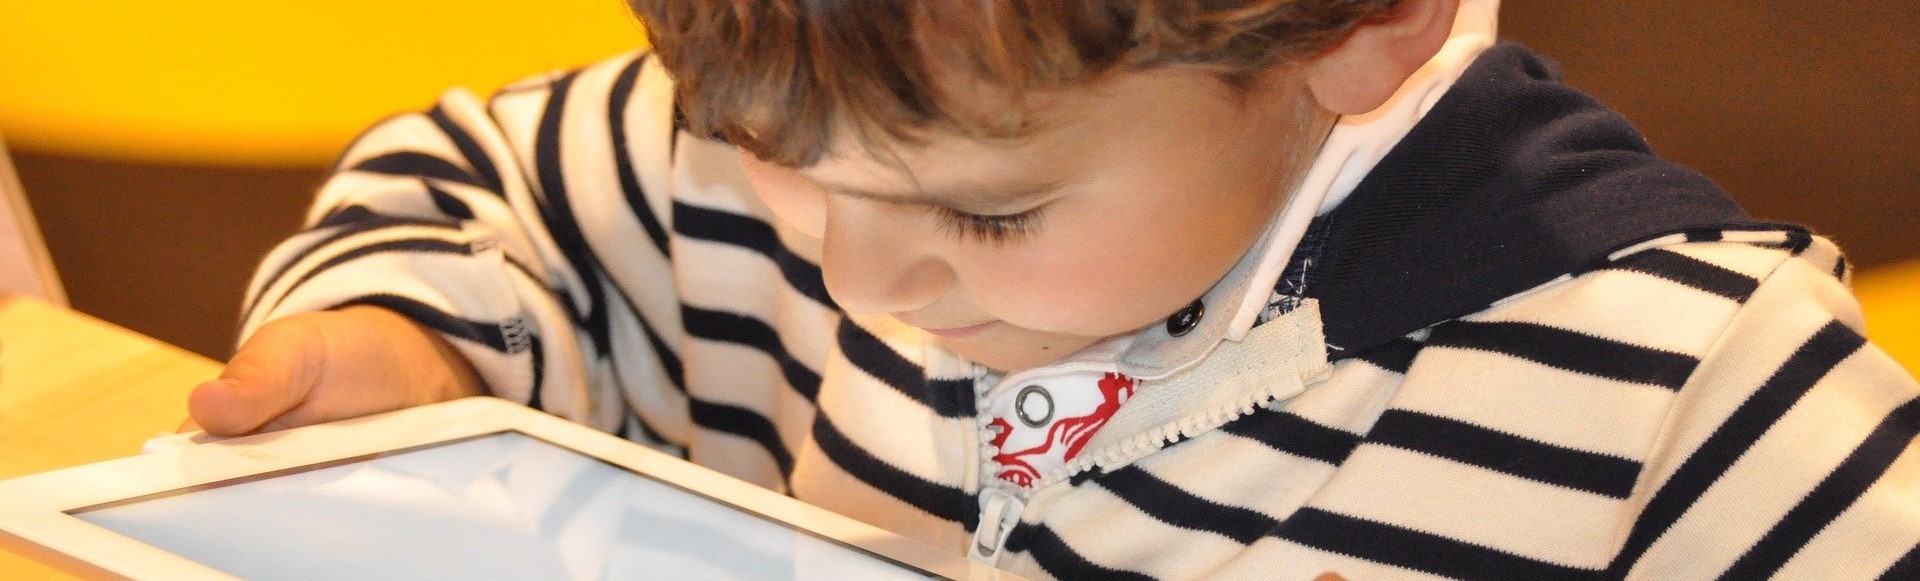 boy looking at a tablet